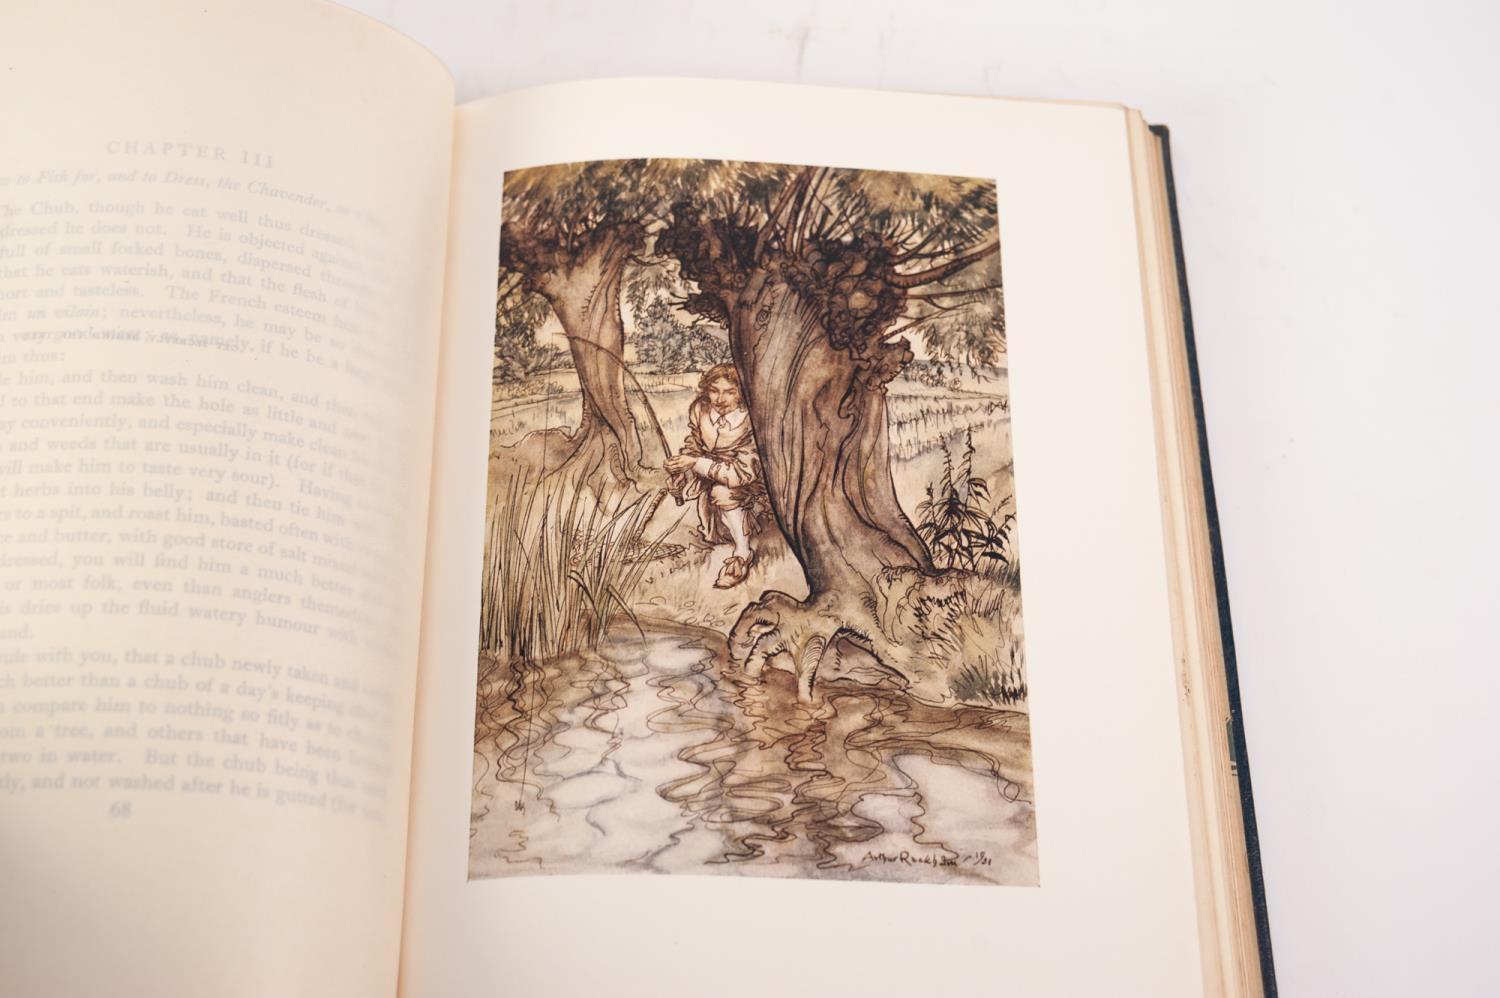 IZAAK WALTON - THE COMPLEAT ANGLER, illustrated by Arthur Rackham, 1931 1st Ed thus This the - Image 4 of 6